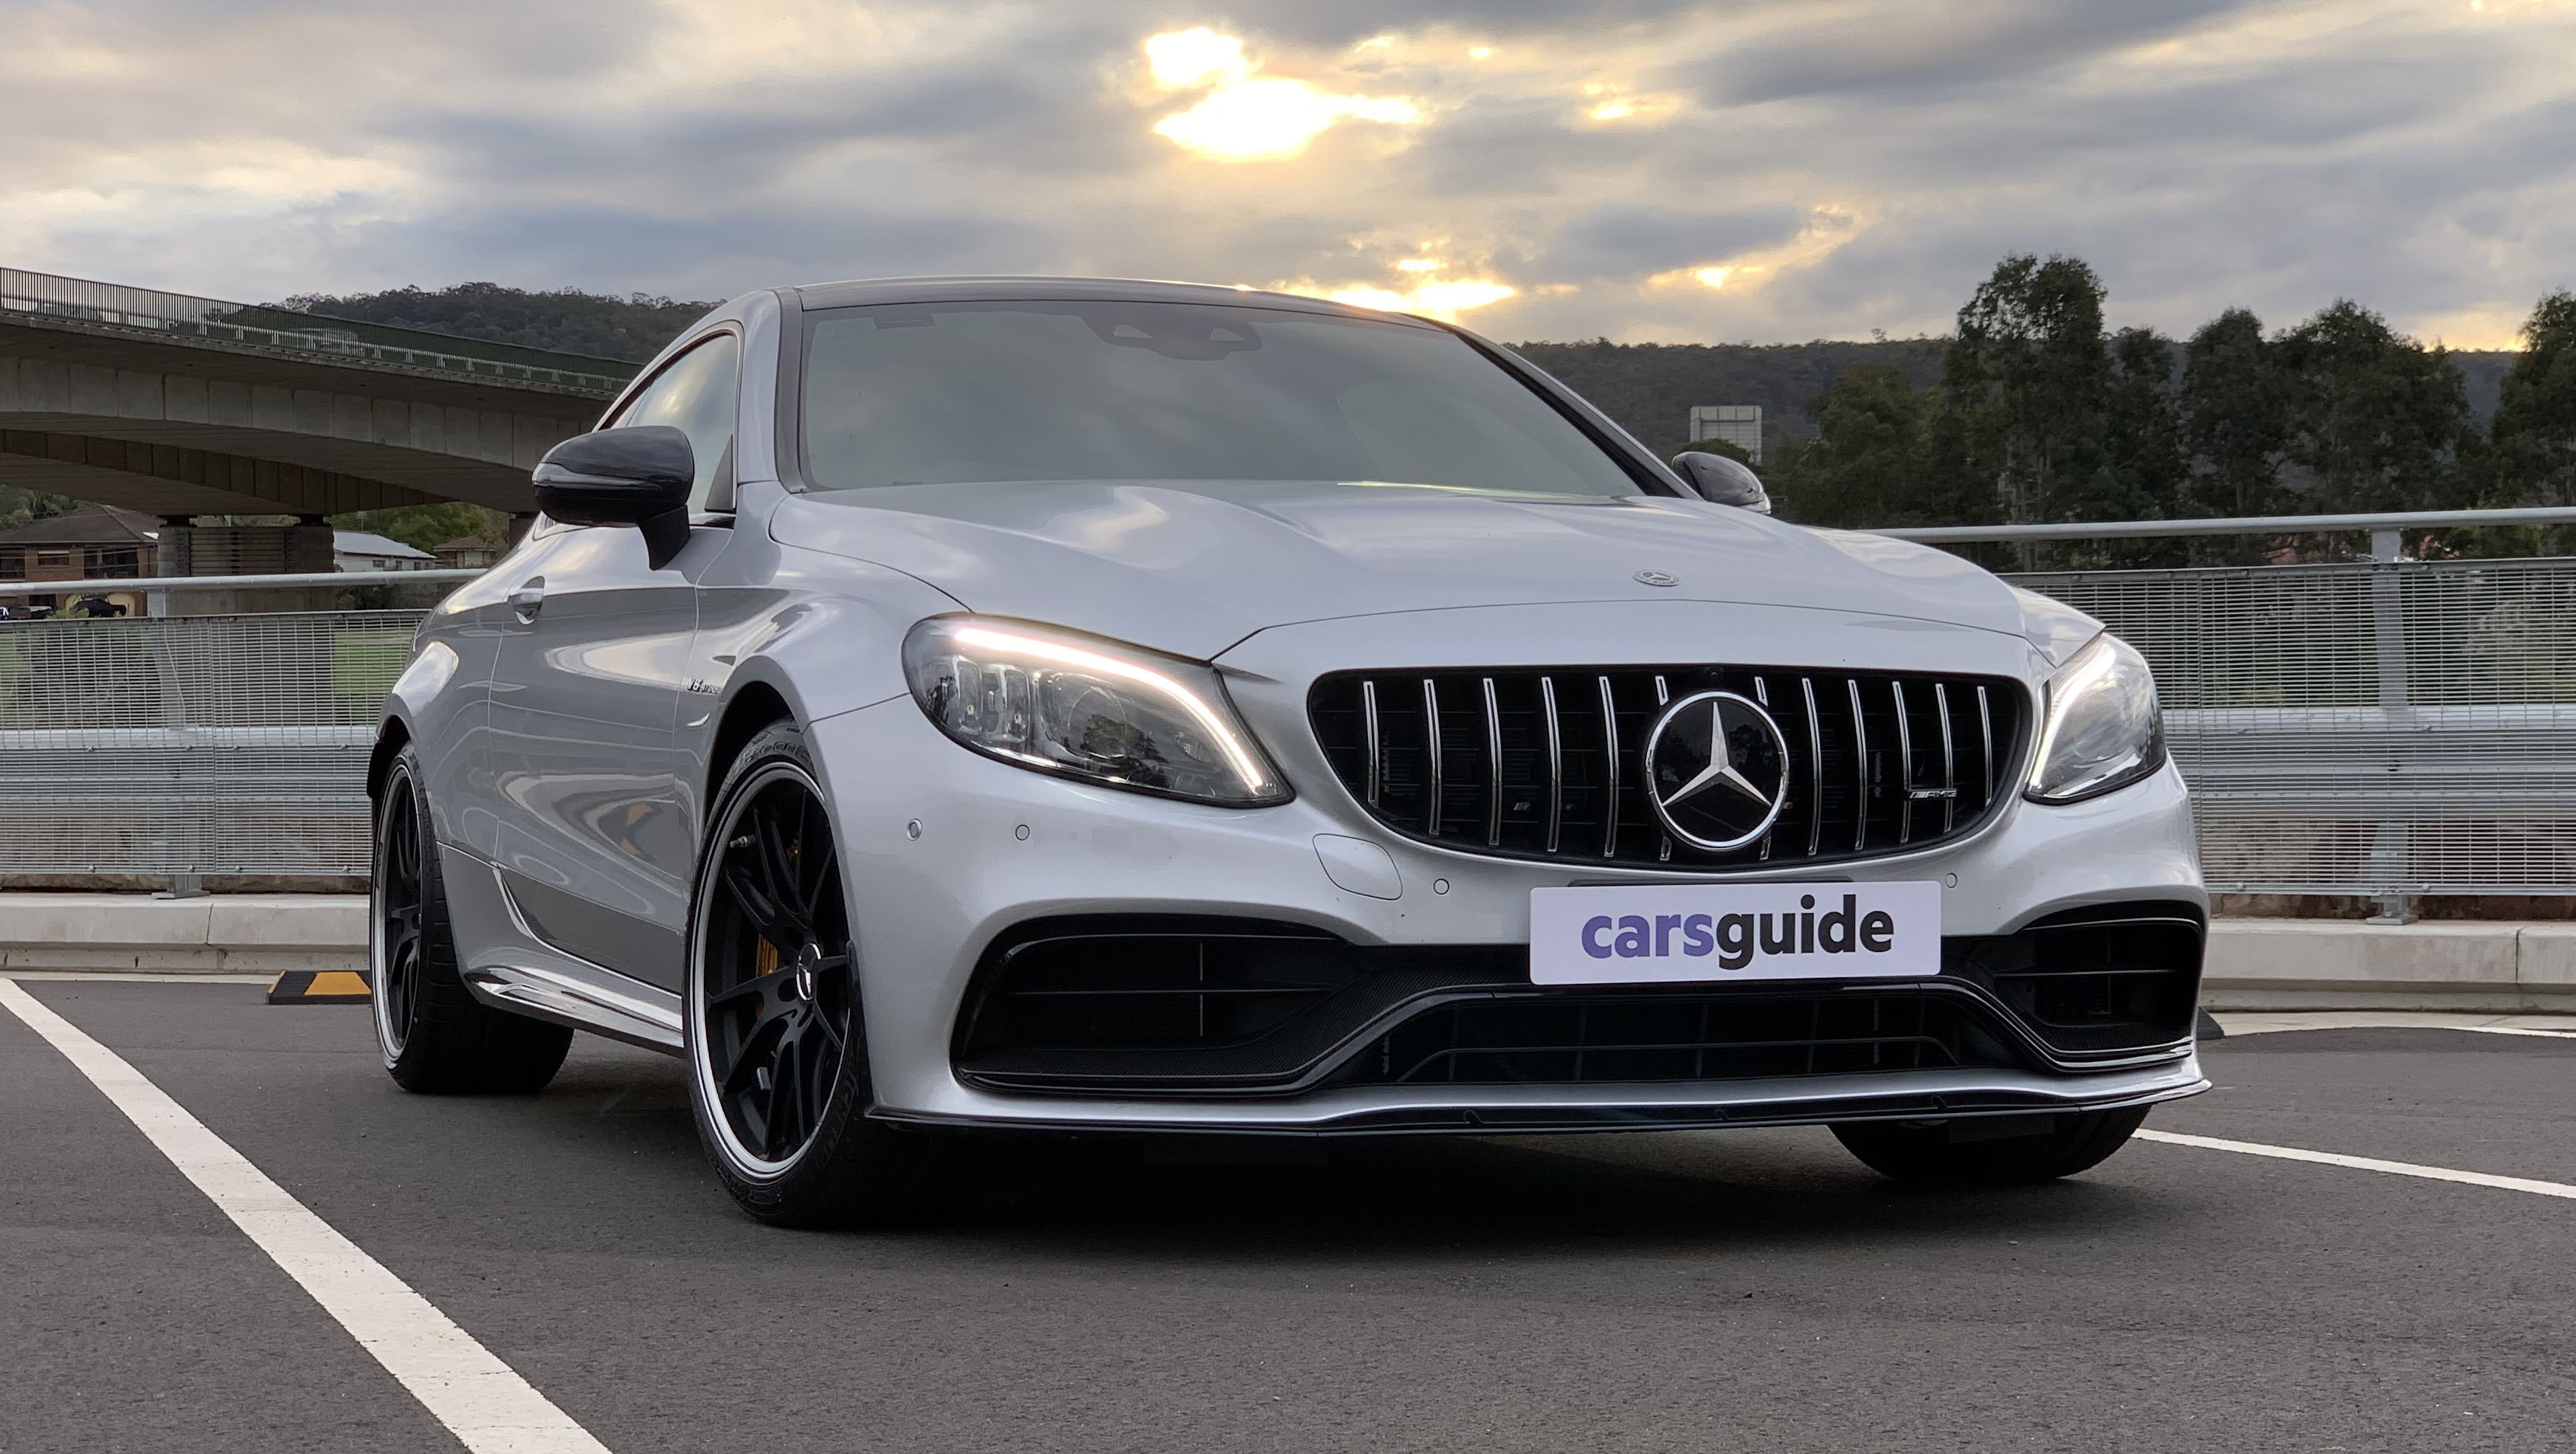 Top Gear review of the new 2023 MercedesAMG C63 S  Supercarsnet